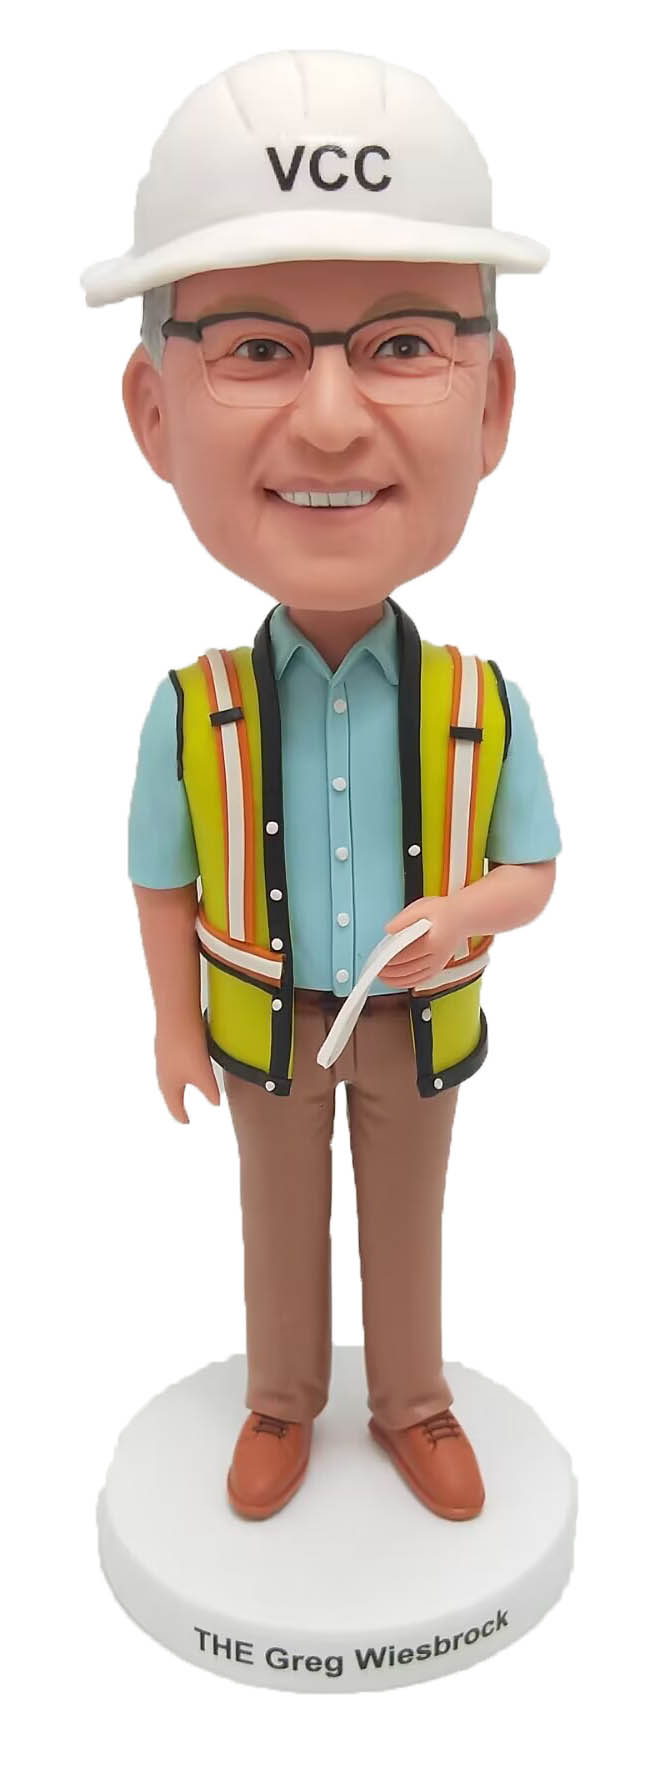 Construction Worker Custom Bobbleheads Personalized figurines